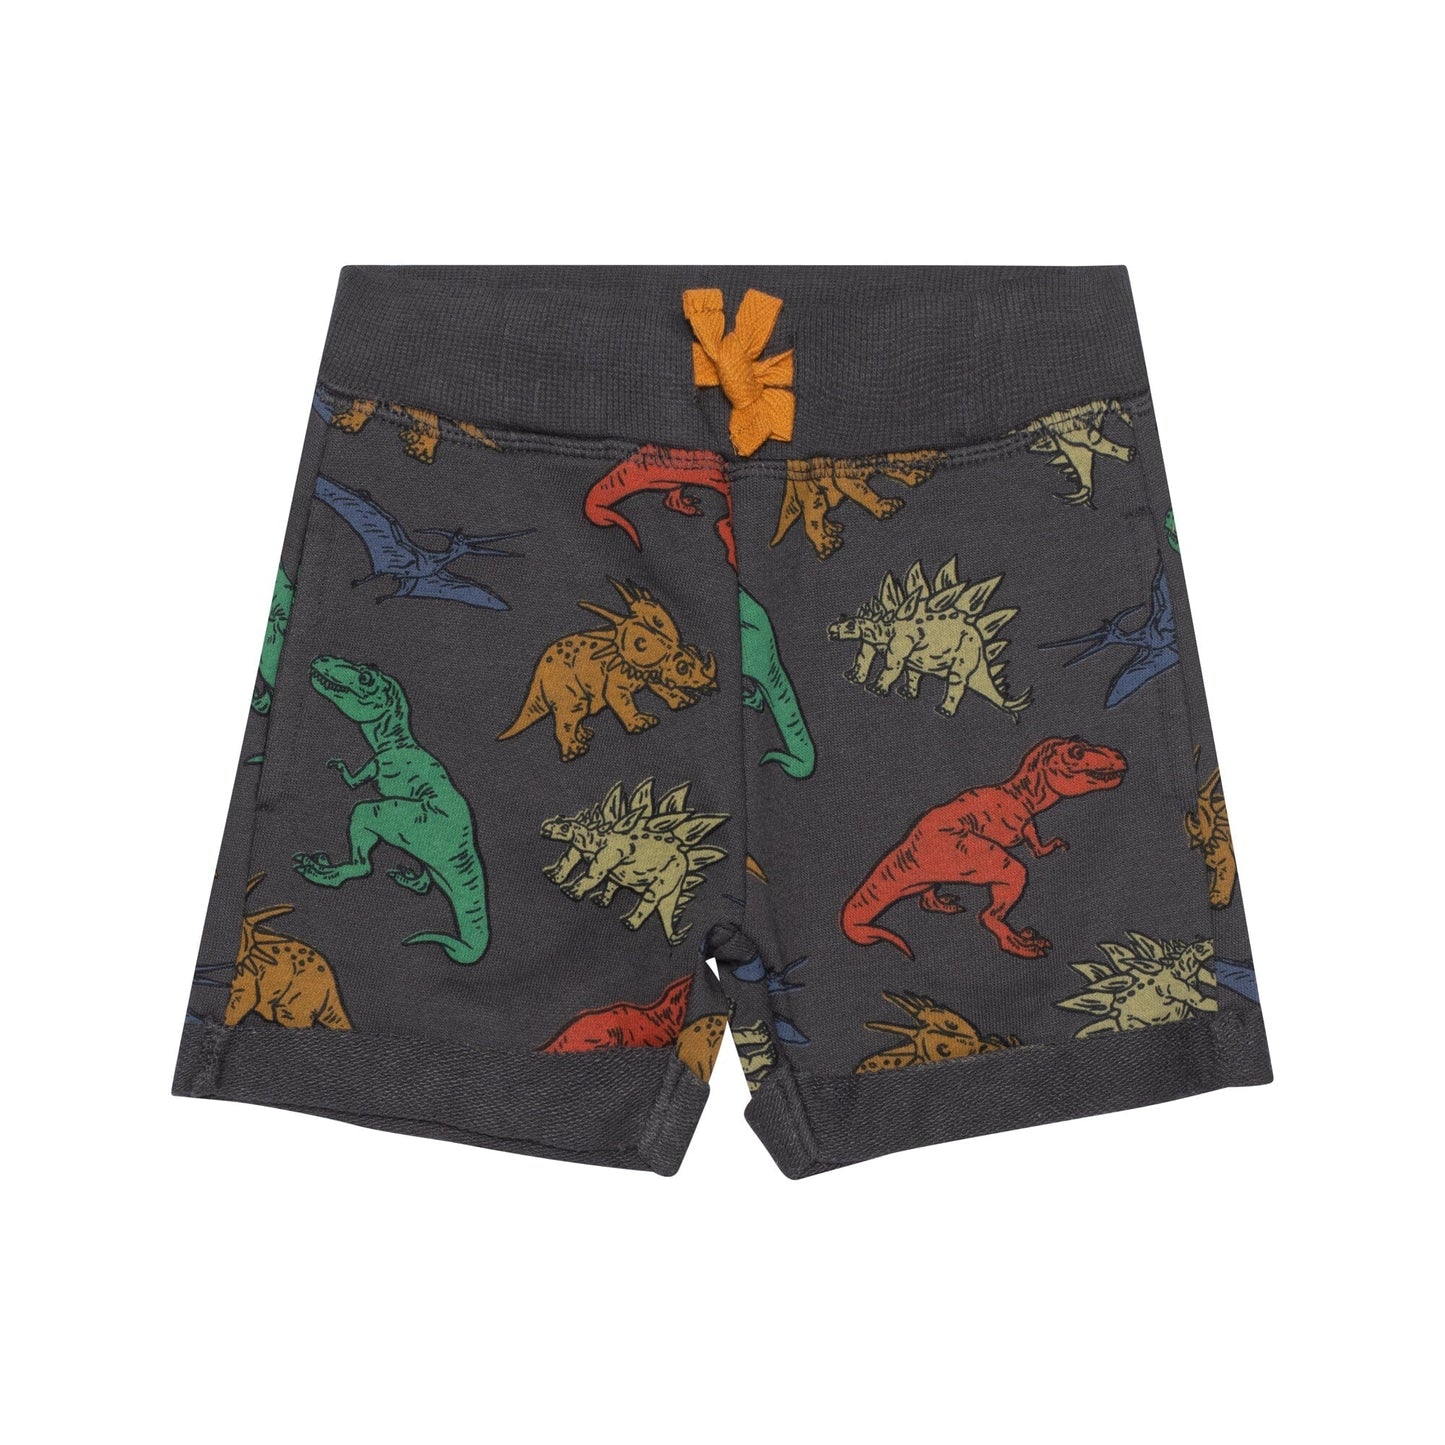 Printed French Terry Short Charcoal Grey Multicolor Dinosaurs - E30S26_090